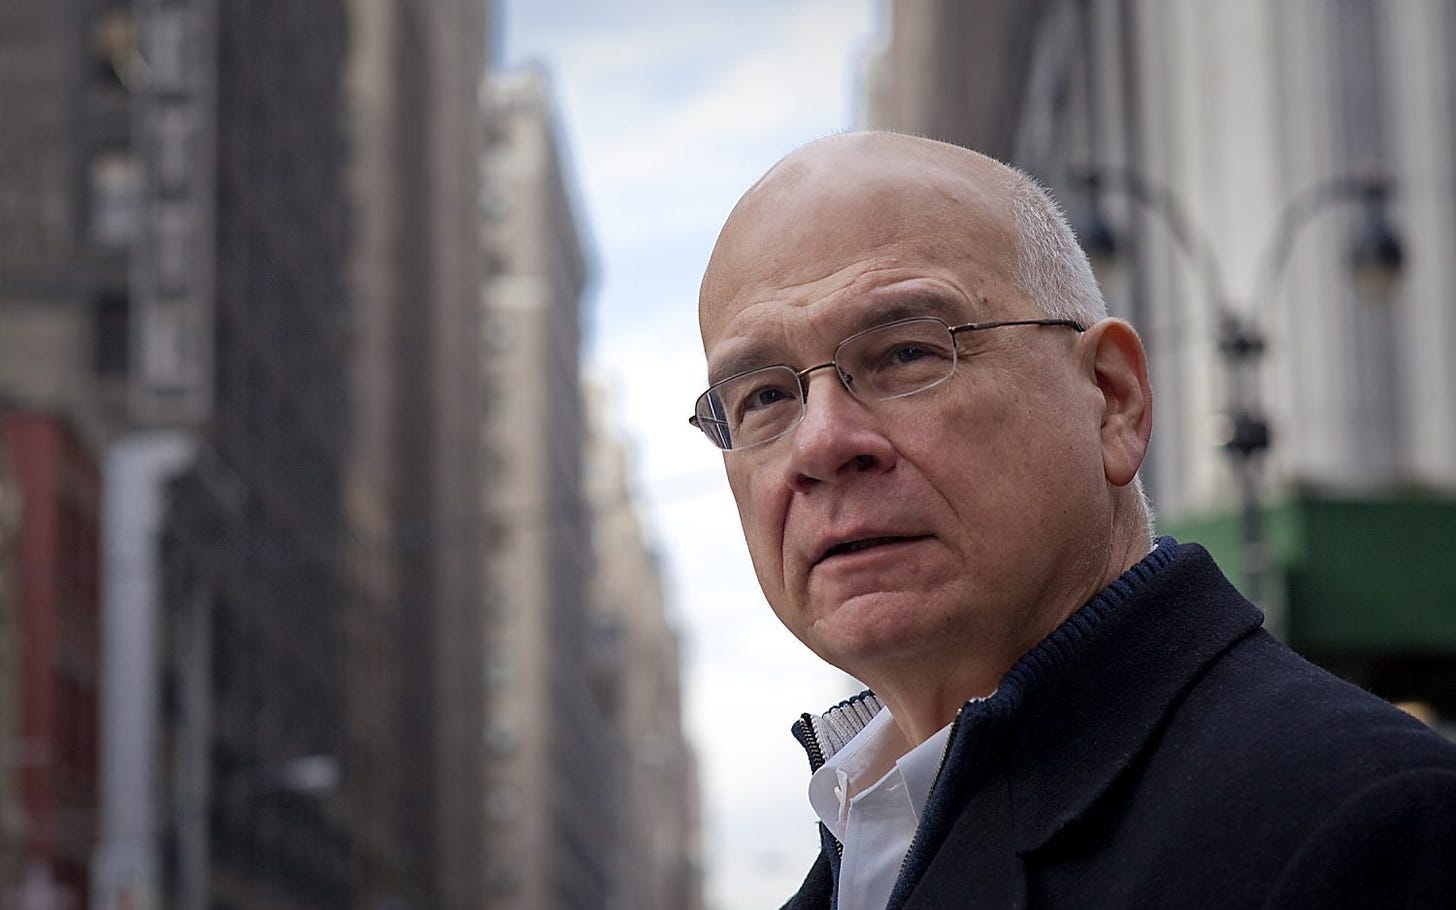 Pastor and apologist Tim Keller dies at age 72 | WORLD